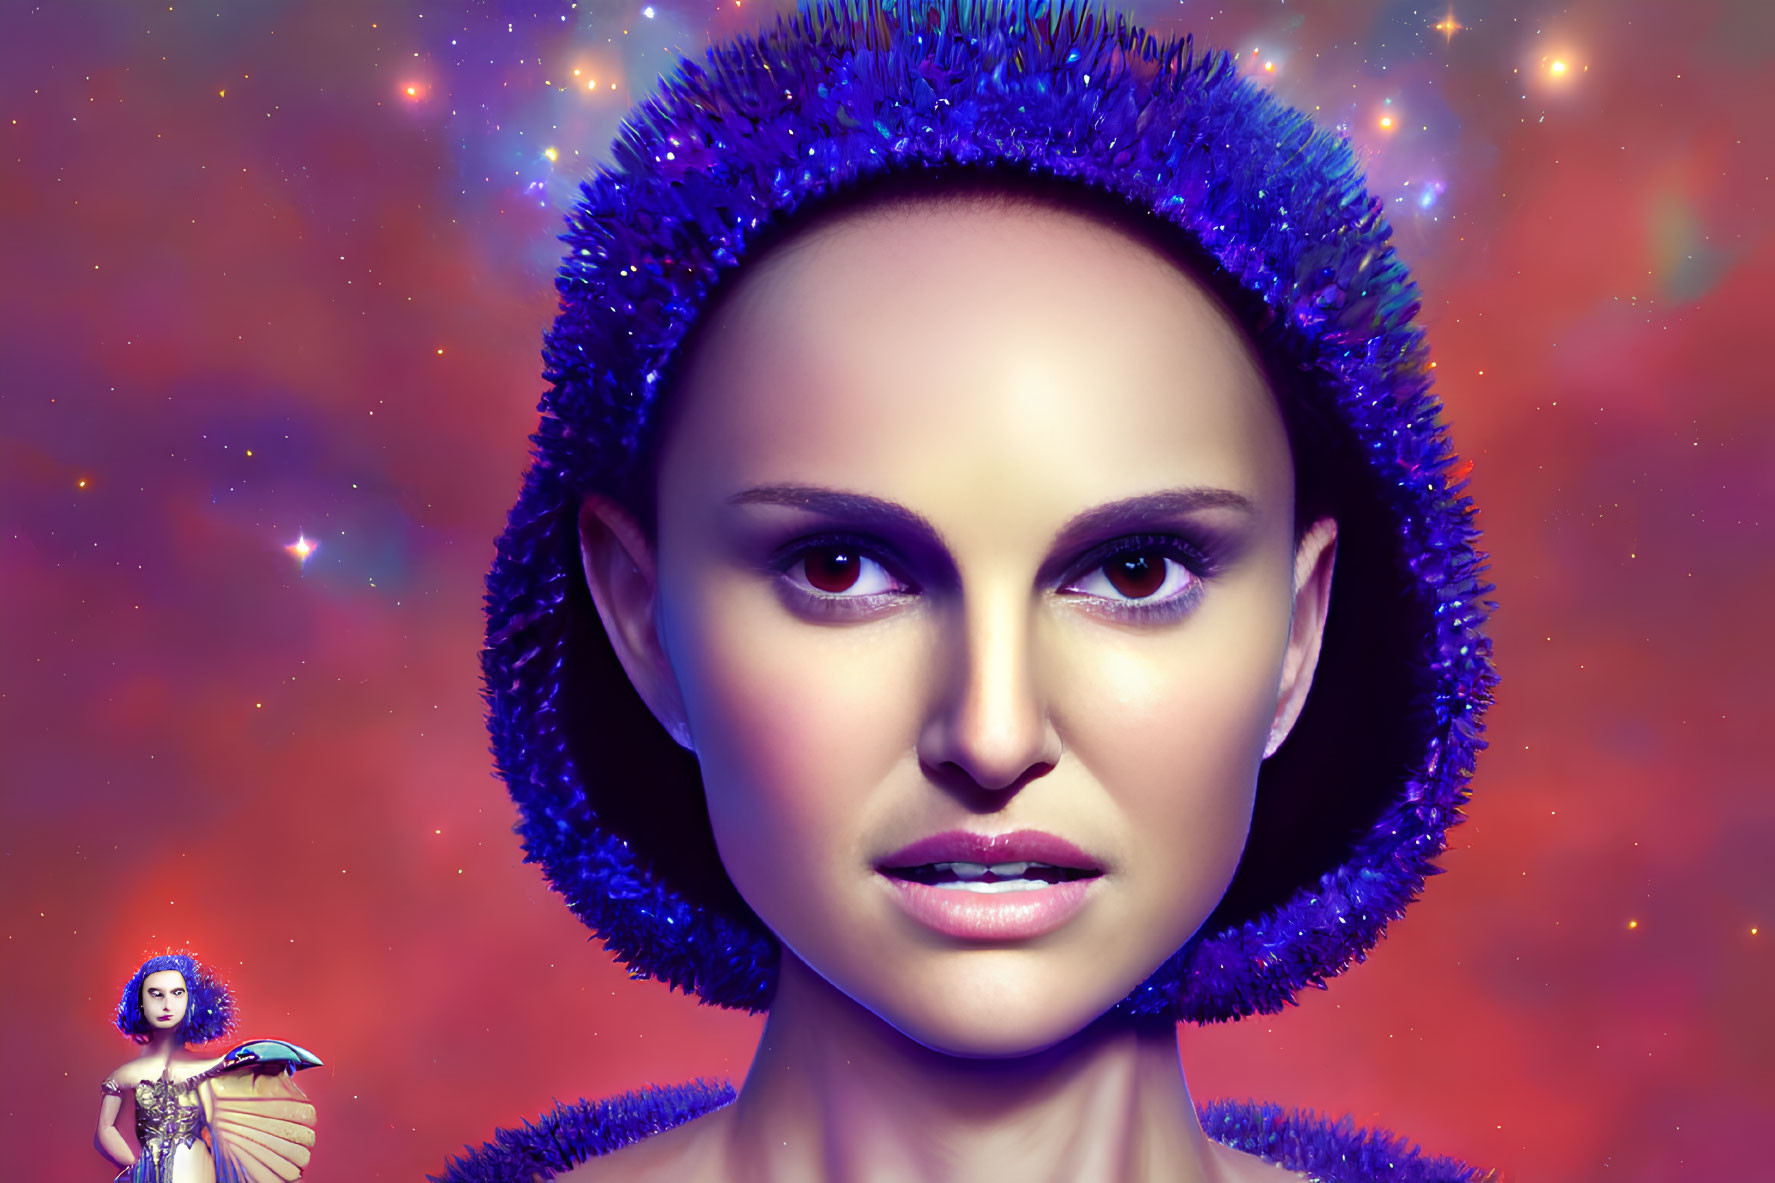 Digital artwork of woman's face with glowing skin in cosmic setting with fantasy figure.